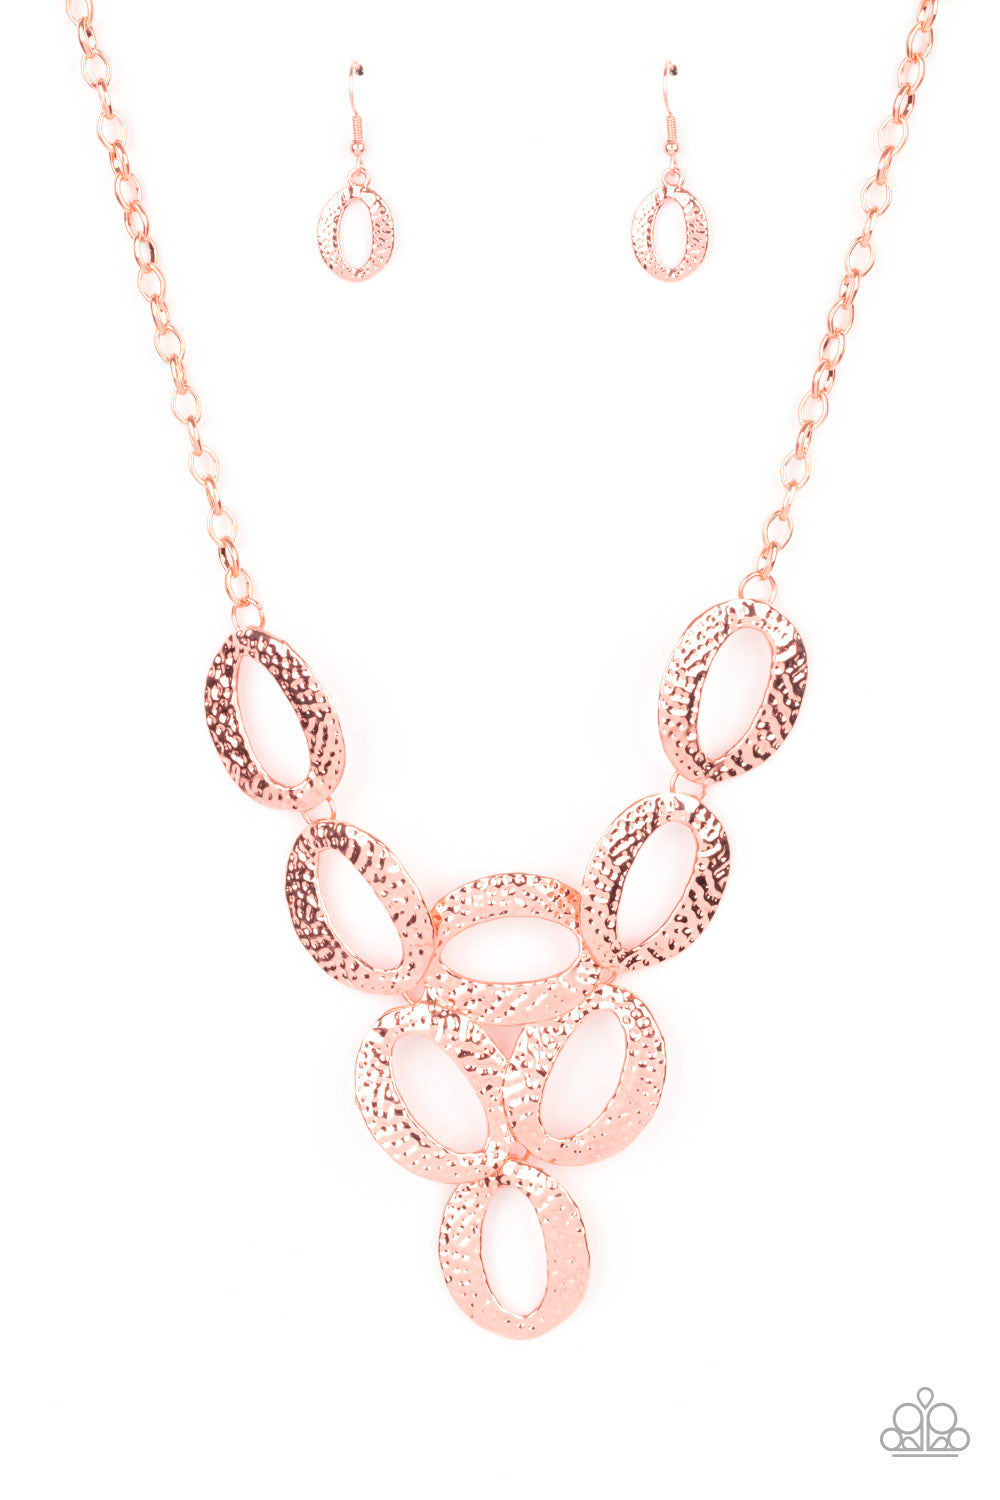 OVAL The Limit - Copper Necklace